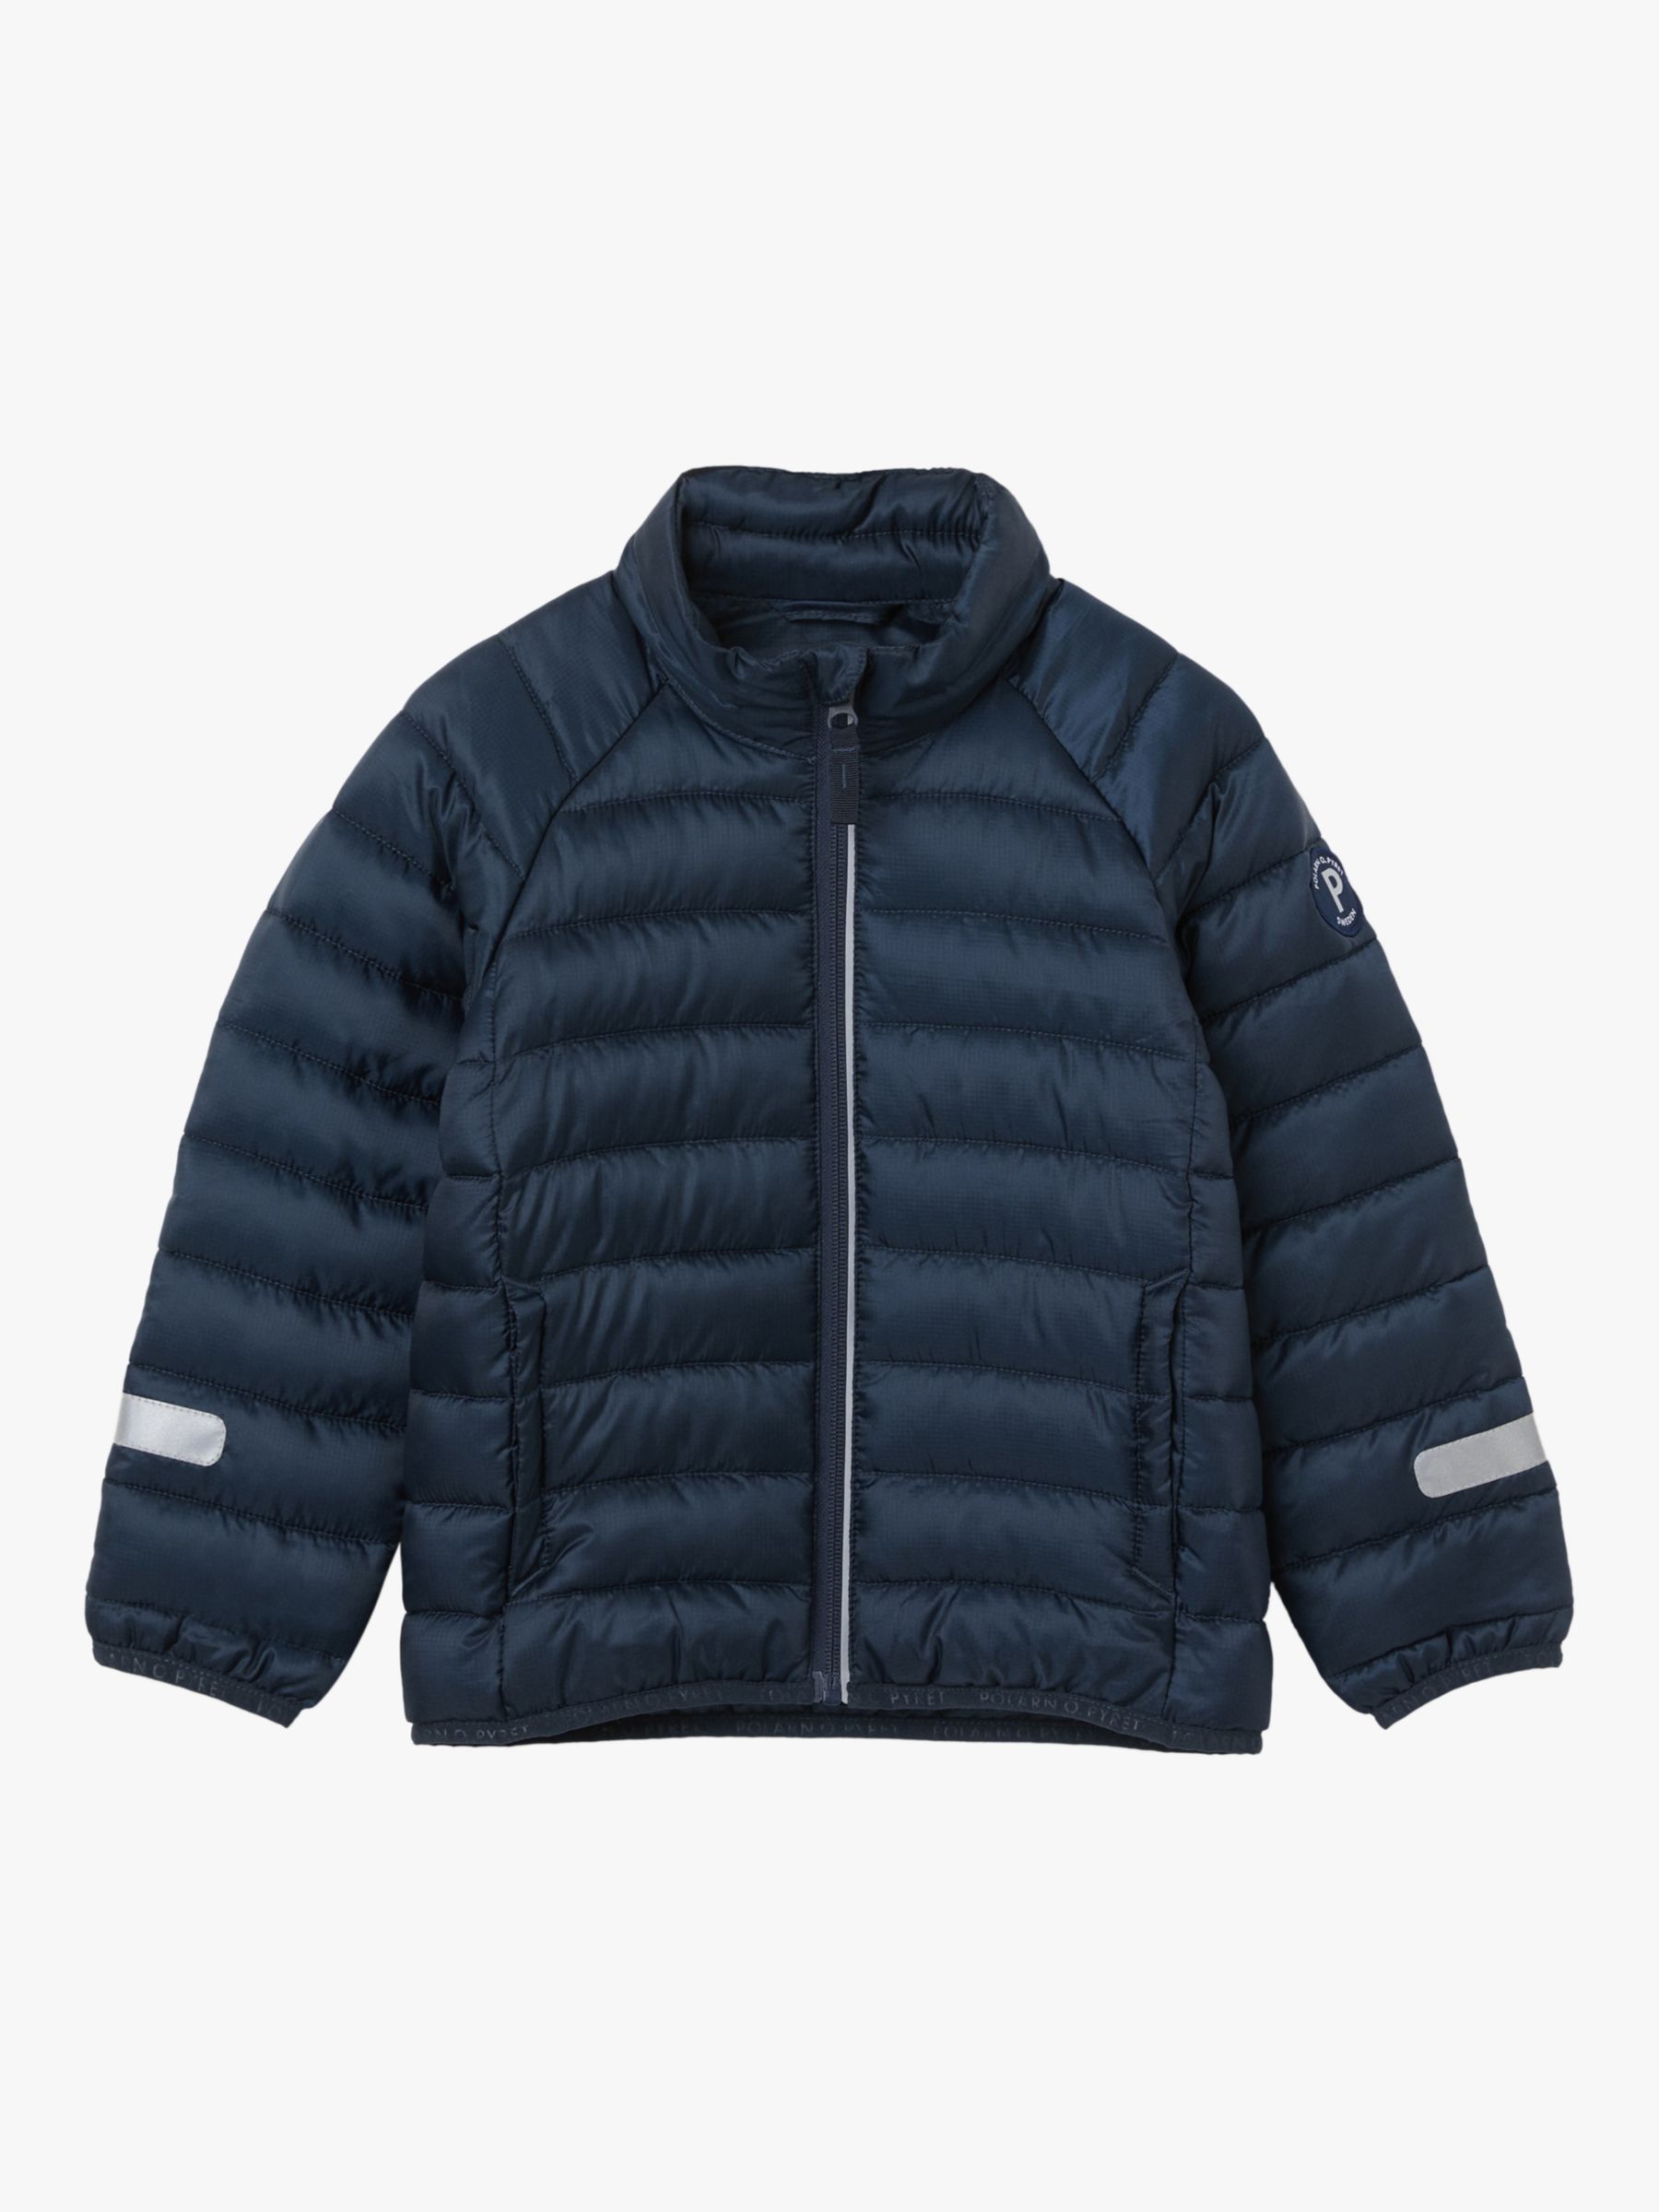 Buy Polarn O. Pyret Kids' Quilted Water Repellent Jacket Online at johnlewis.com